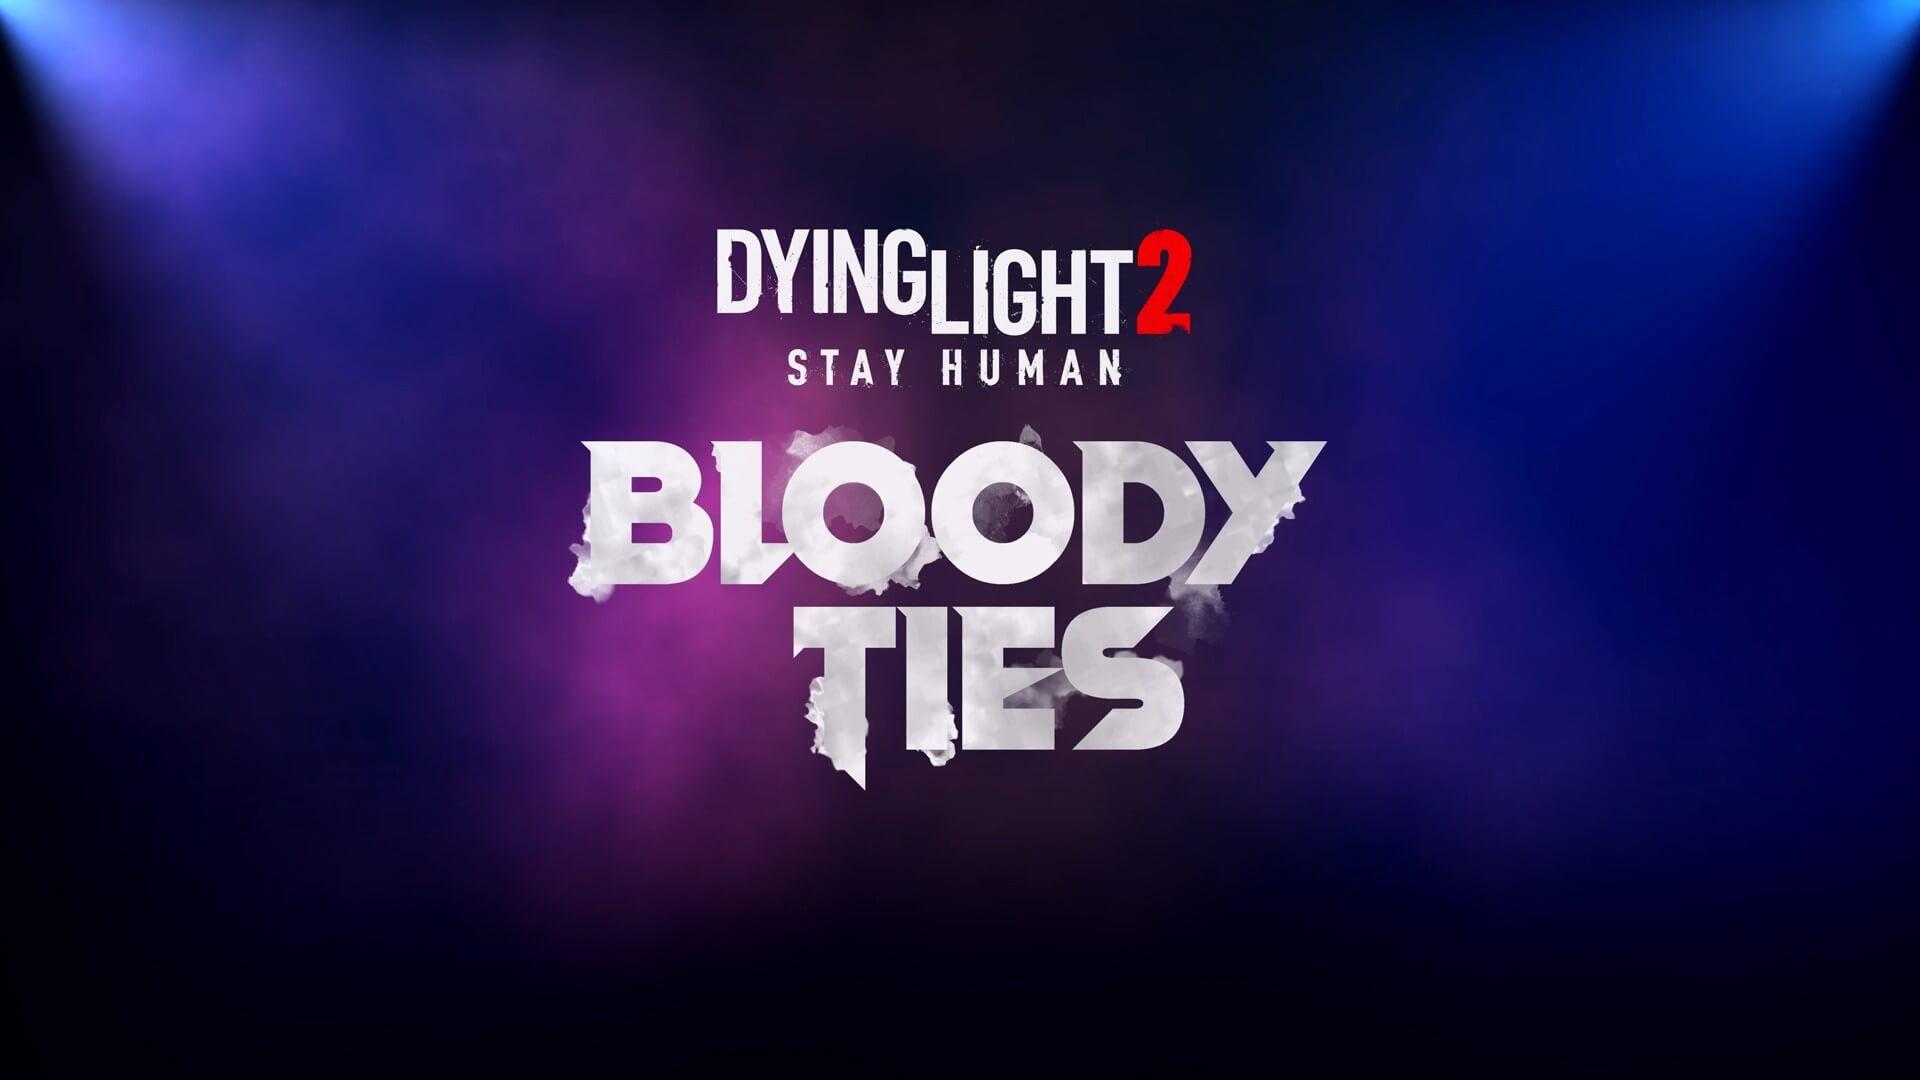 dying light 2 stay human bloody ties